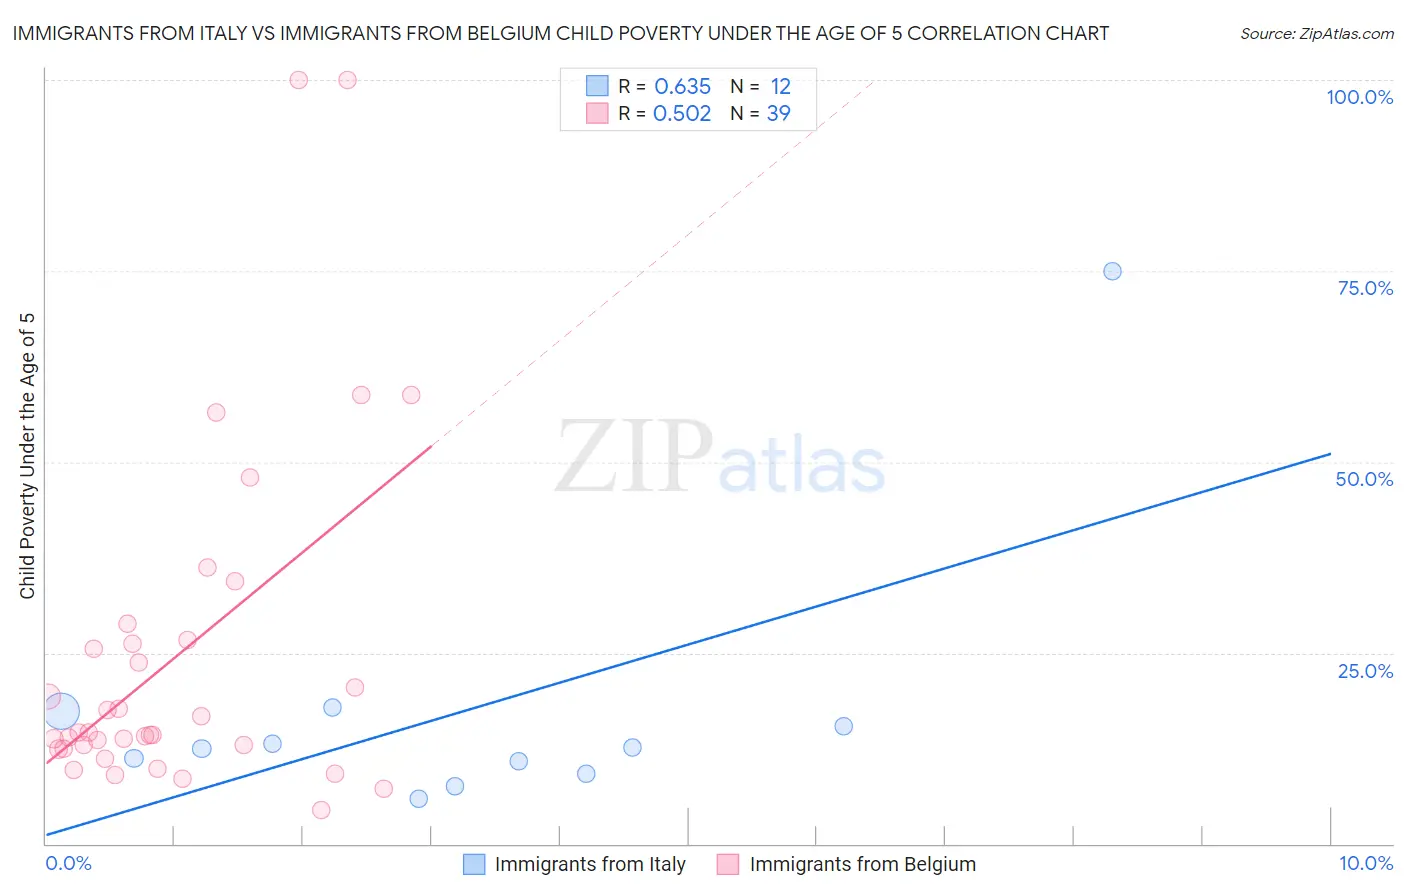 Immigrants from Italy vs Immigrants from Belgium Child Poverty Under the Age of 5